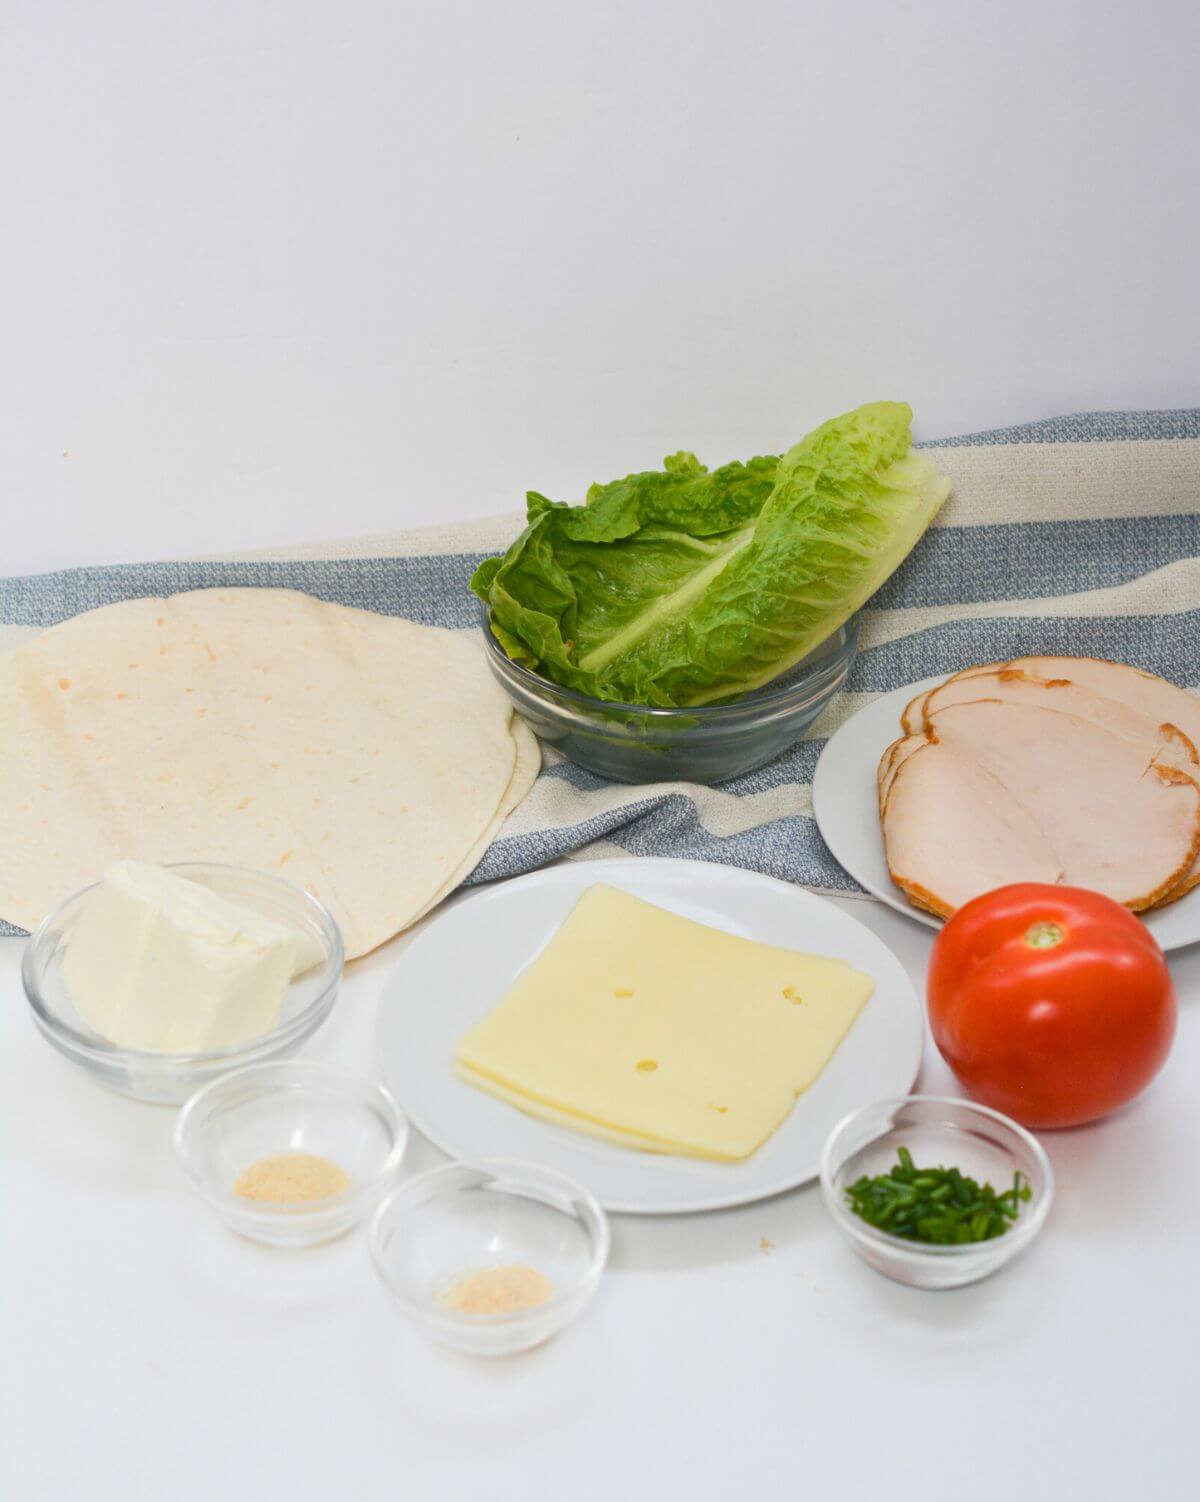 A plate with cheese, tomatoes, lettuce and other ingredients.